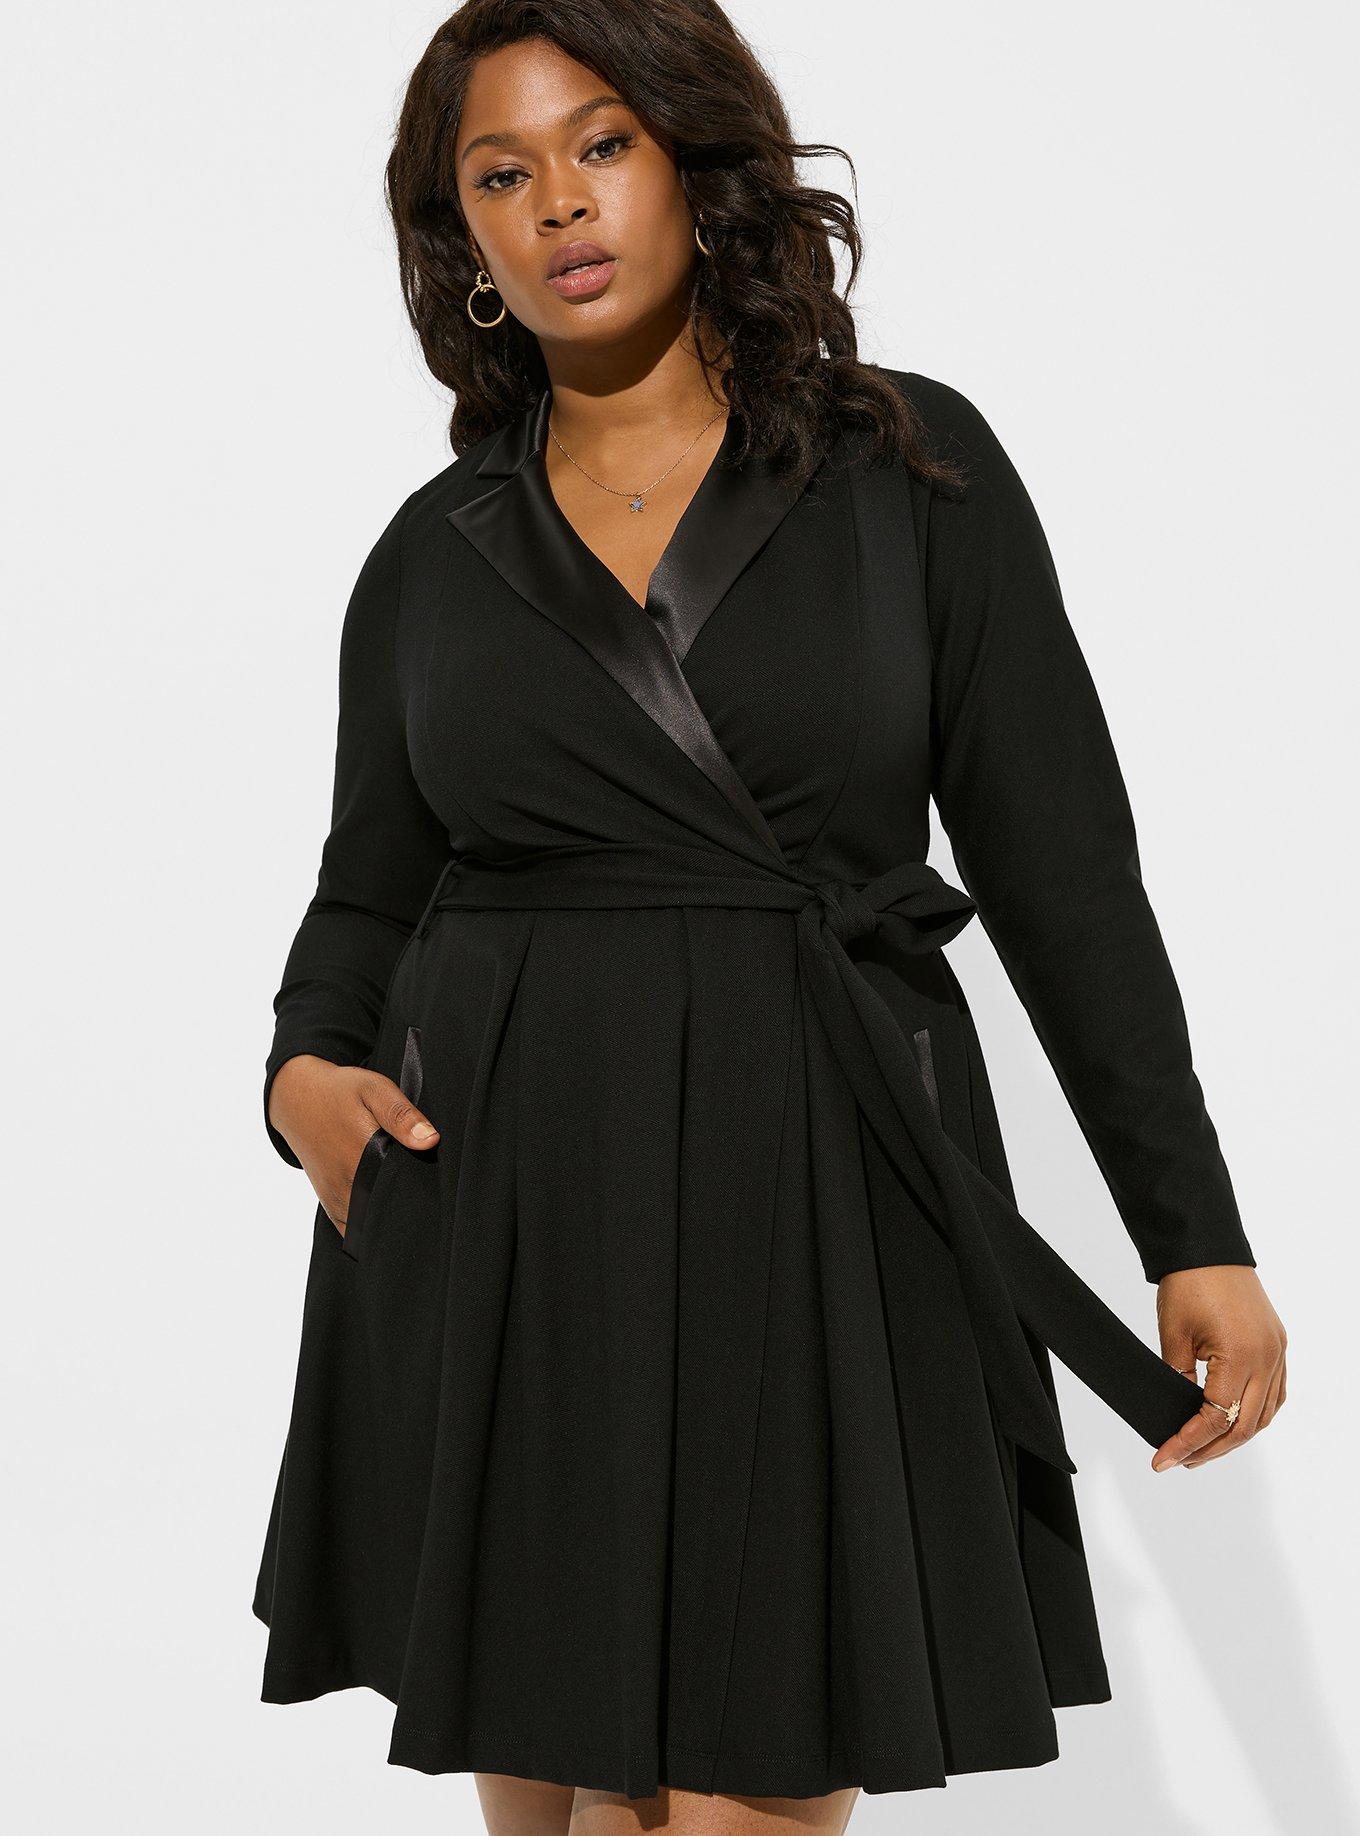 Torrid Plus Size In The Dressing Room (mini RANT) Trying On 4x and